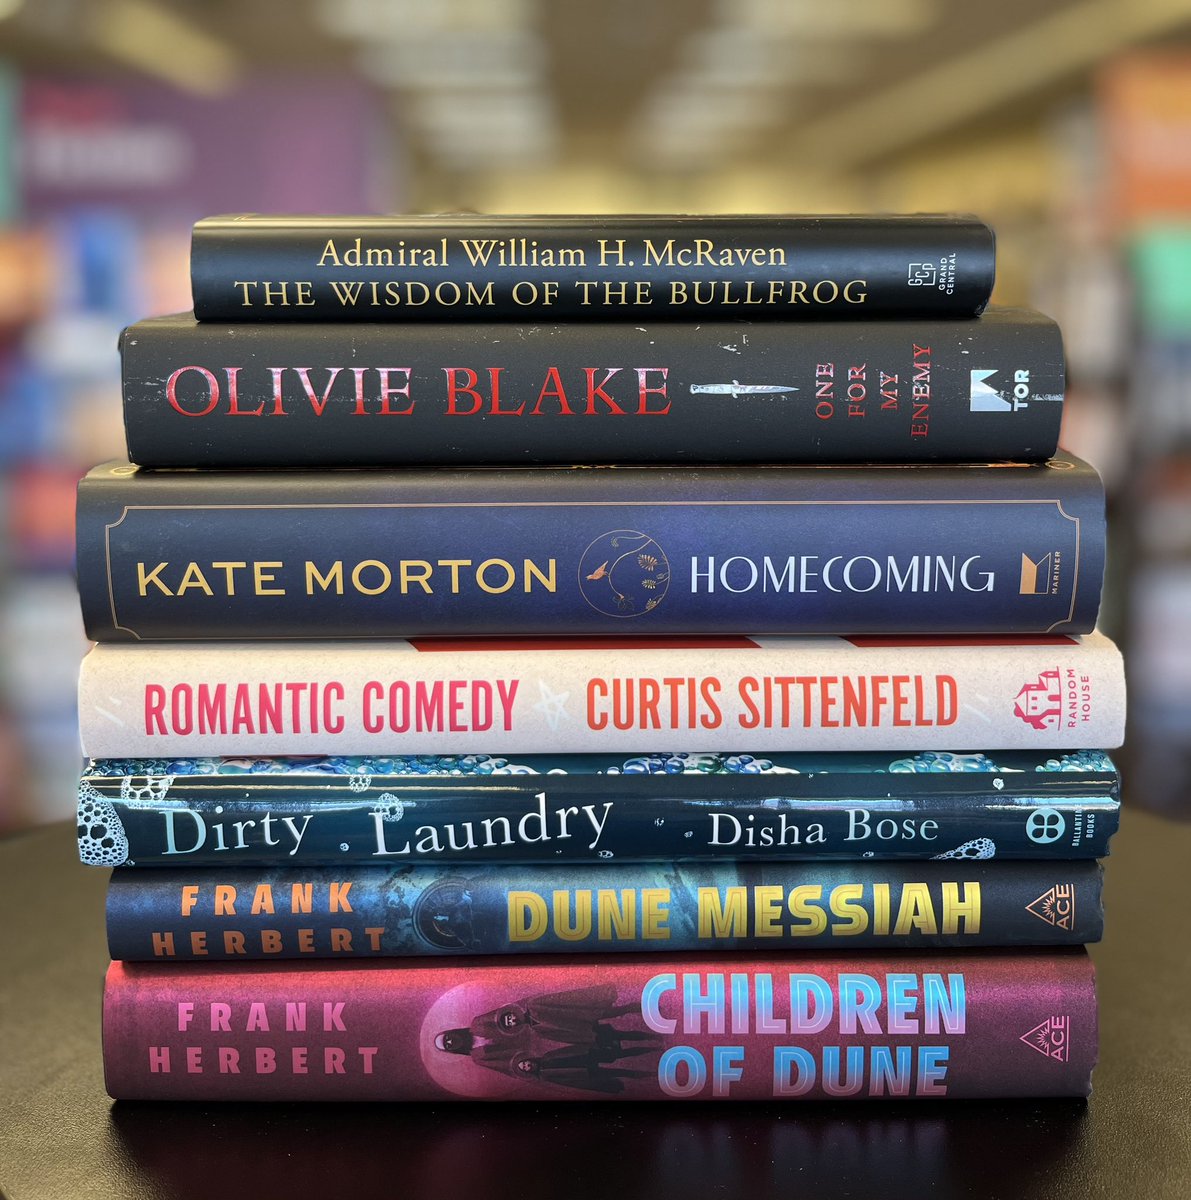 #NewReleaseTuesday with new special editions of the Dune sequels as well as new releases from @OlivieBlake and #KateMorton ! Get them while they’re hot 🔥📚